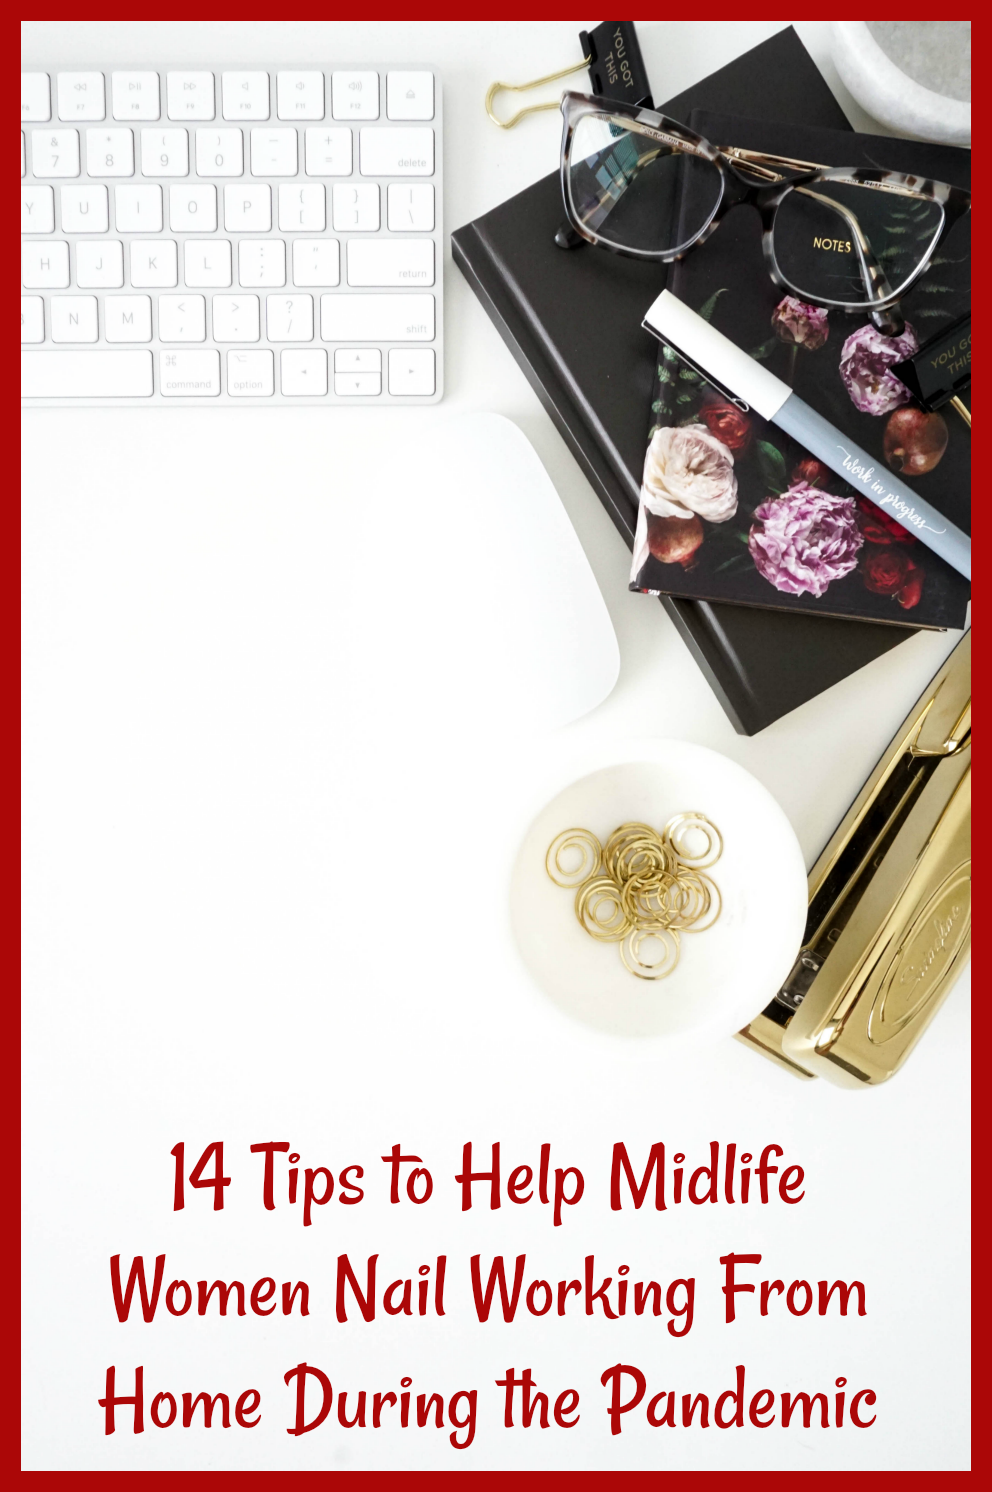 14 Tips to Help Midlife Women Nail Working From Home During the Pandemic